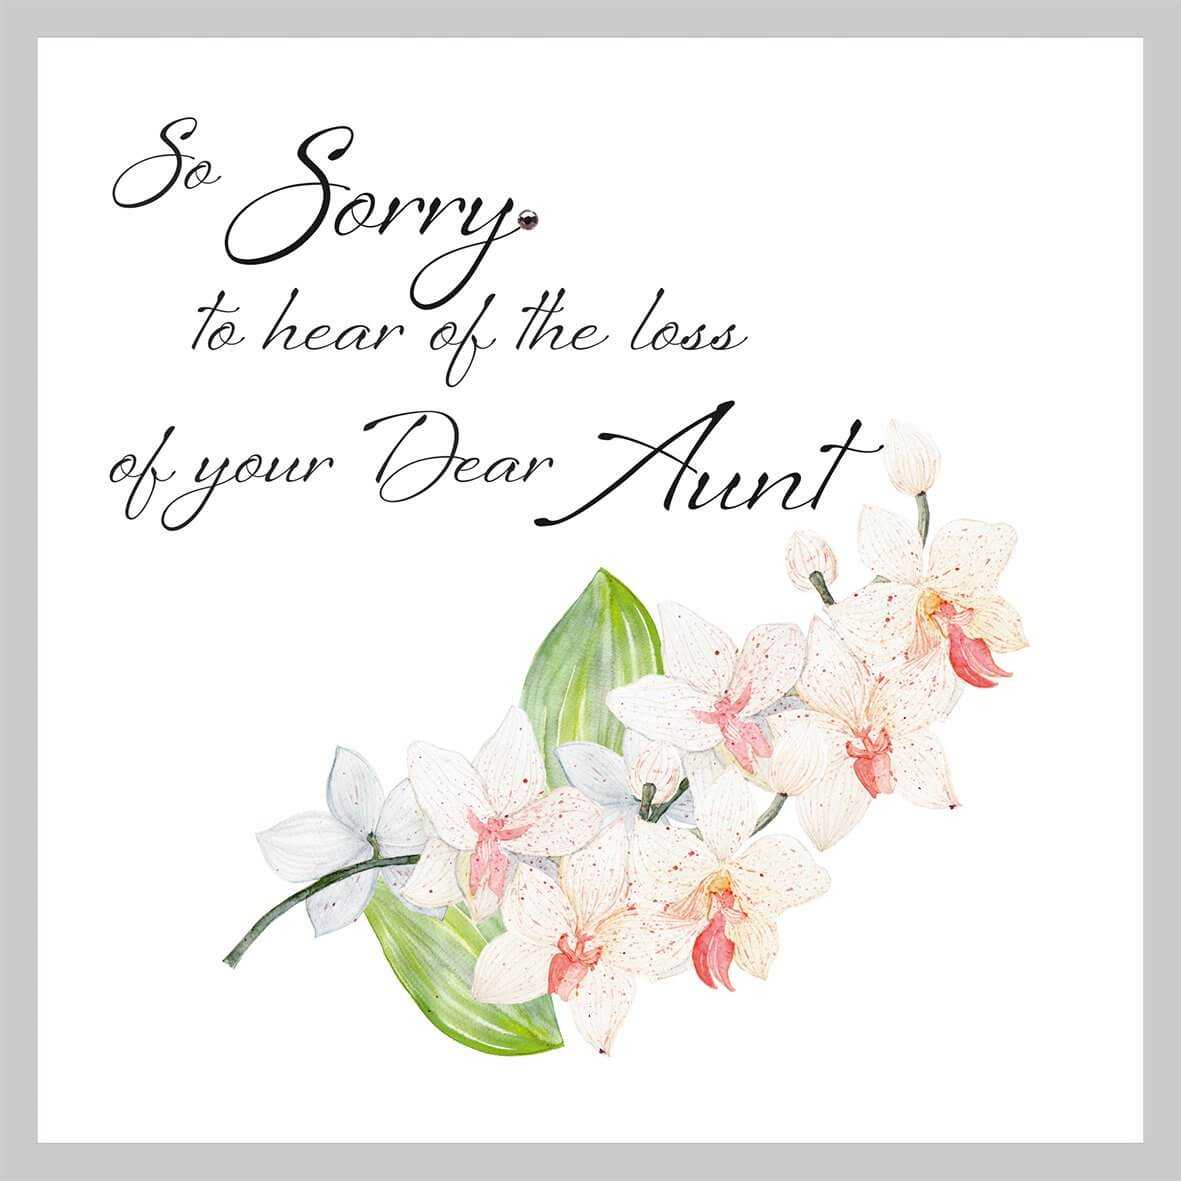 So Sorry To Hear The Loss Of Your Dear Aunt In Sorry For Your Loss Card Template